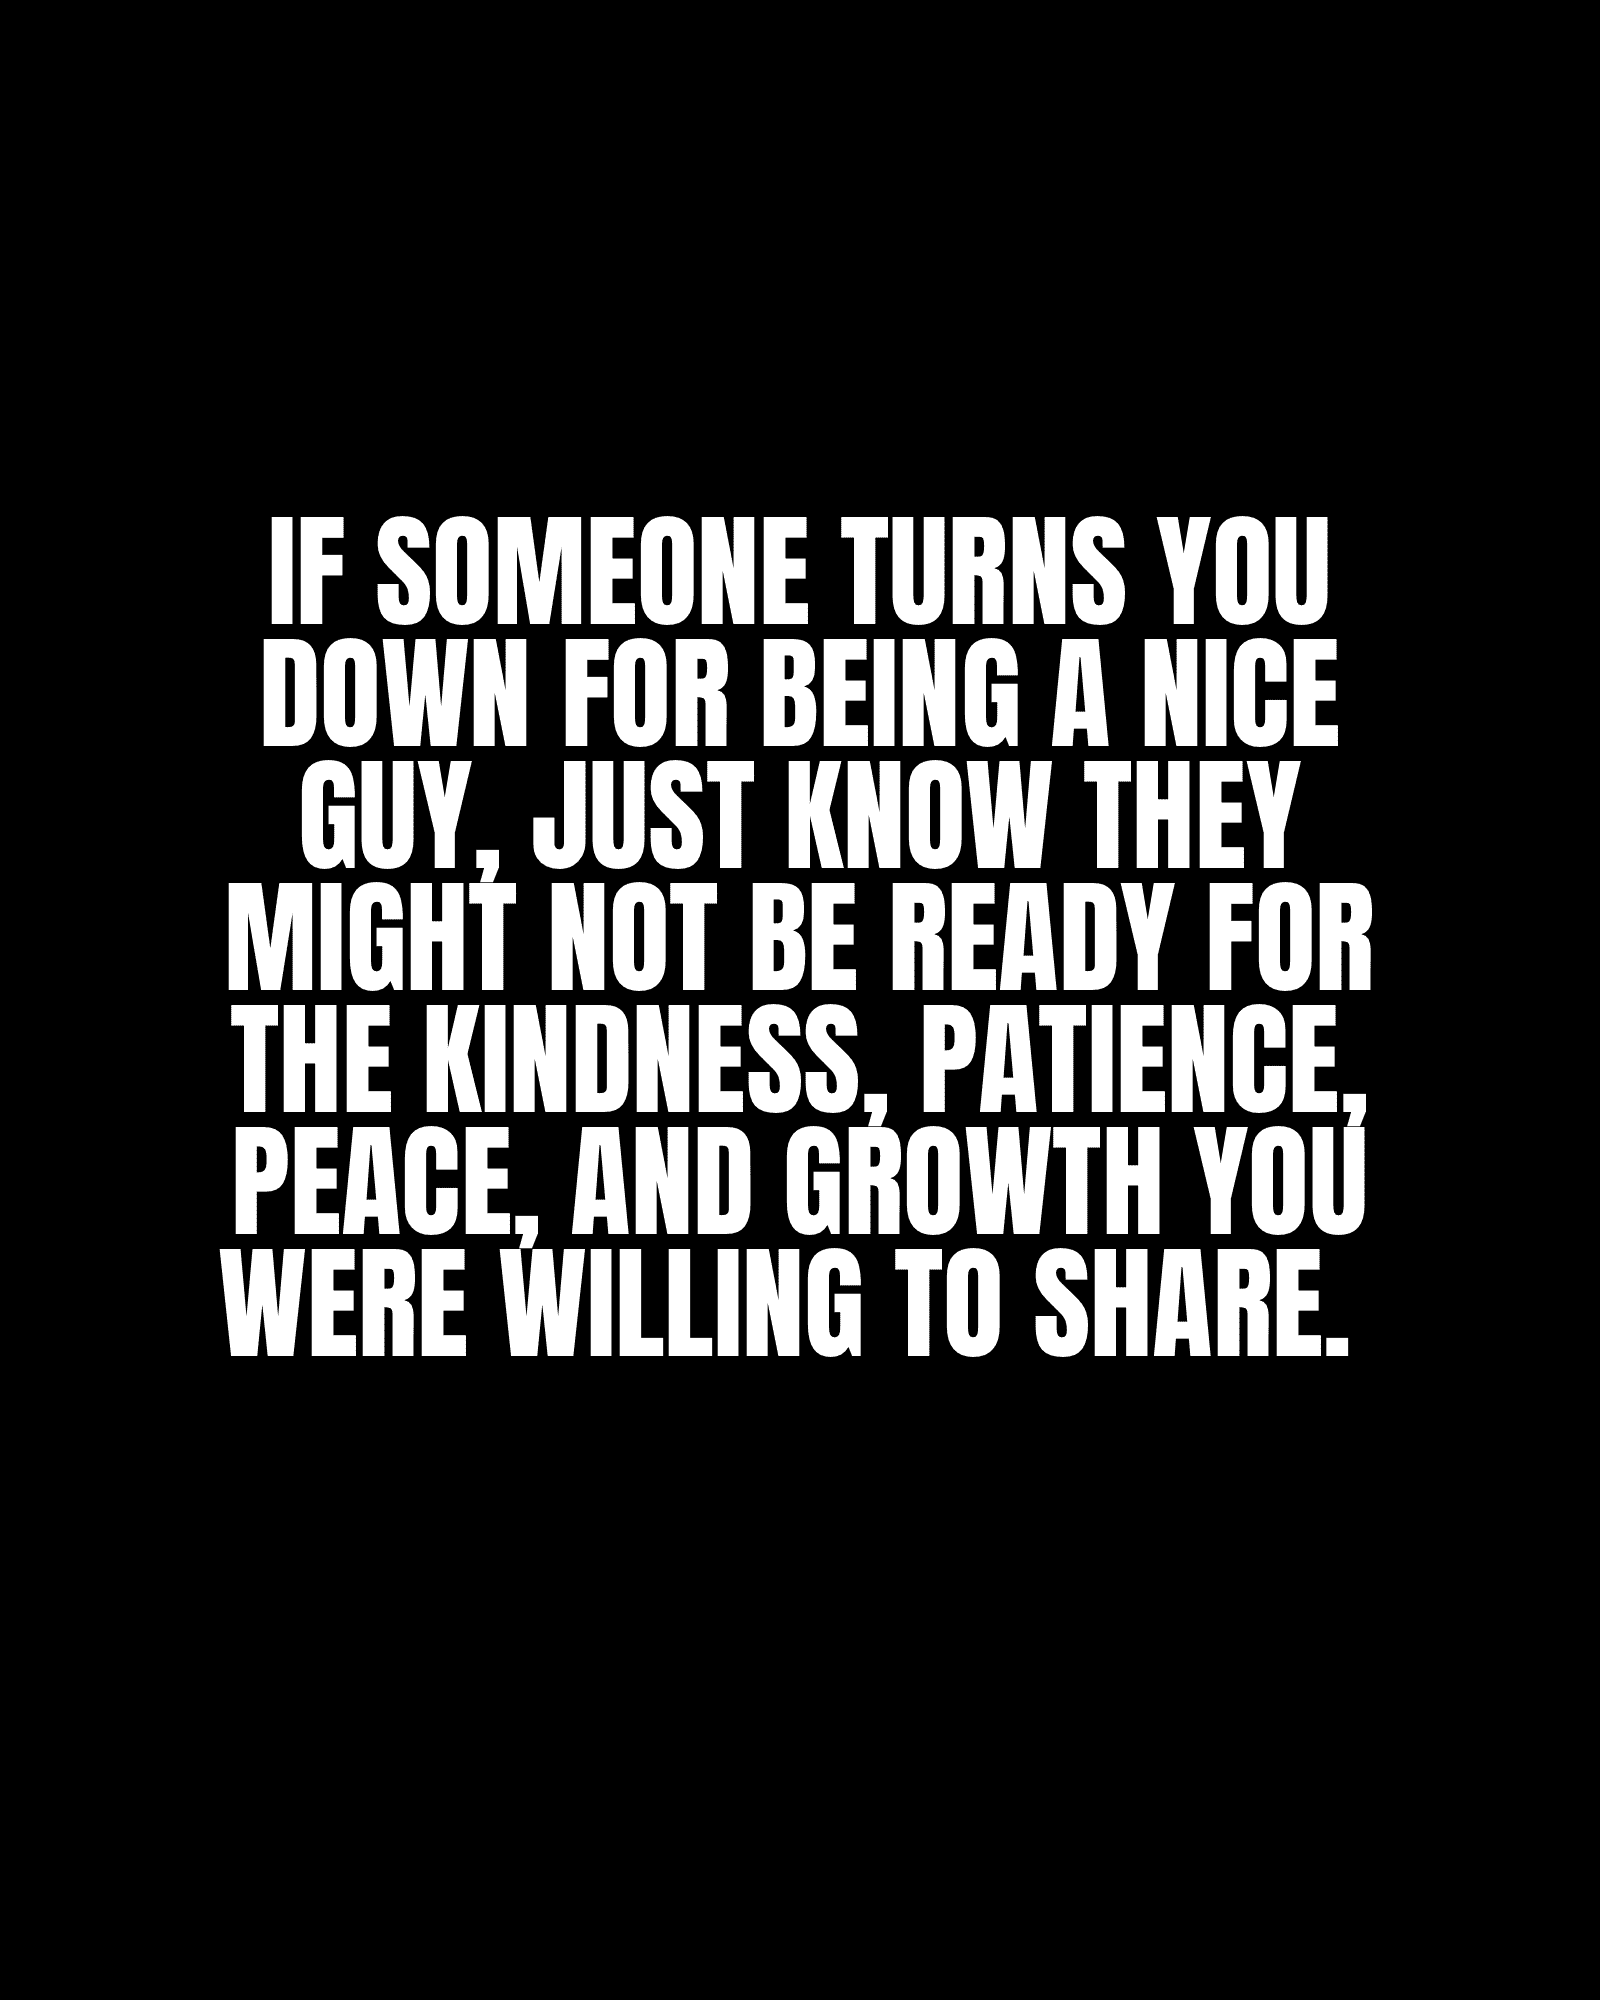 If someone turns you down for being a nice guy, just know they might not be ready for the kindness, patience, peace, and growth you were willing to share.